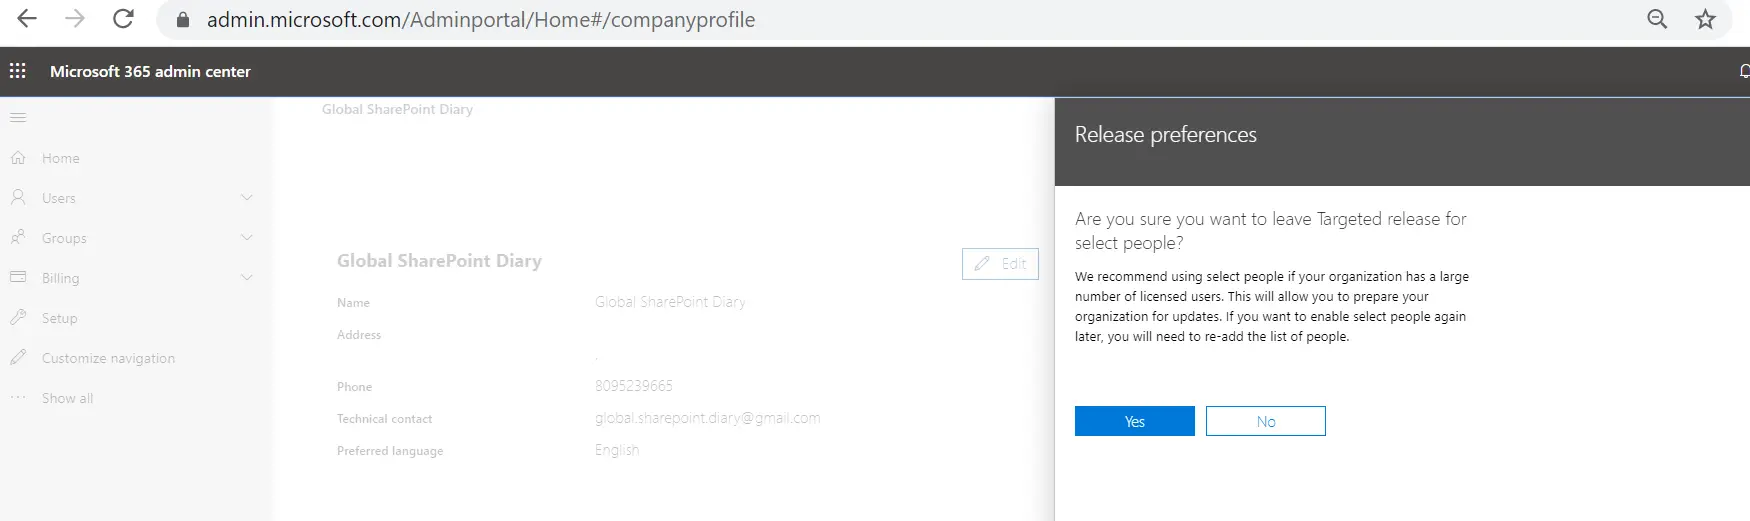 Release Preferences in Office 365 - Organization Profile - Everyone